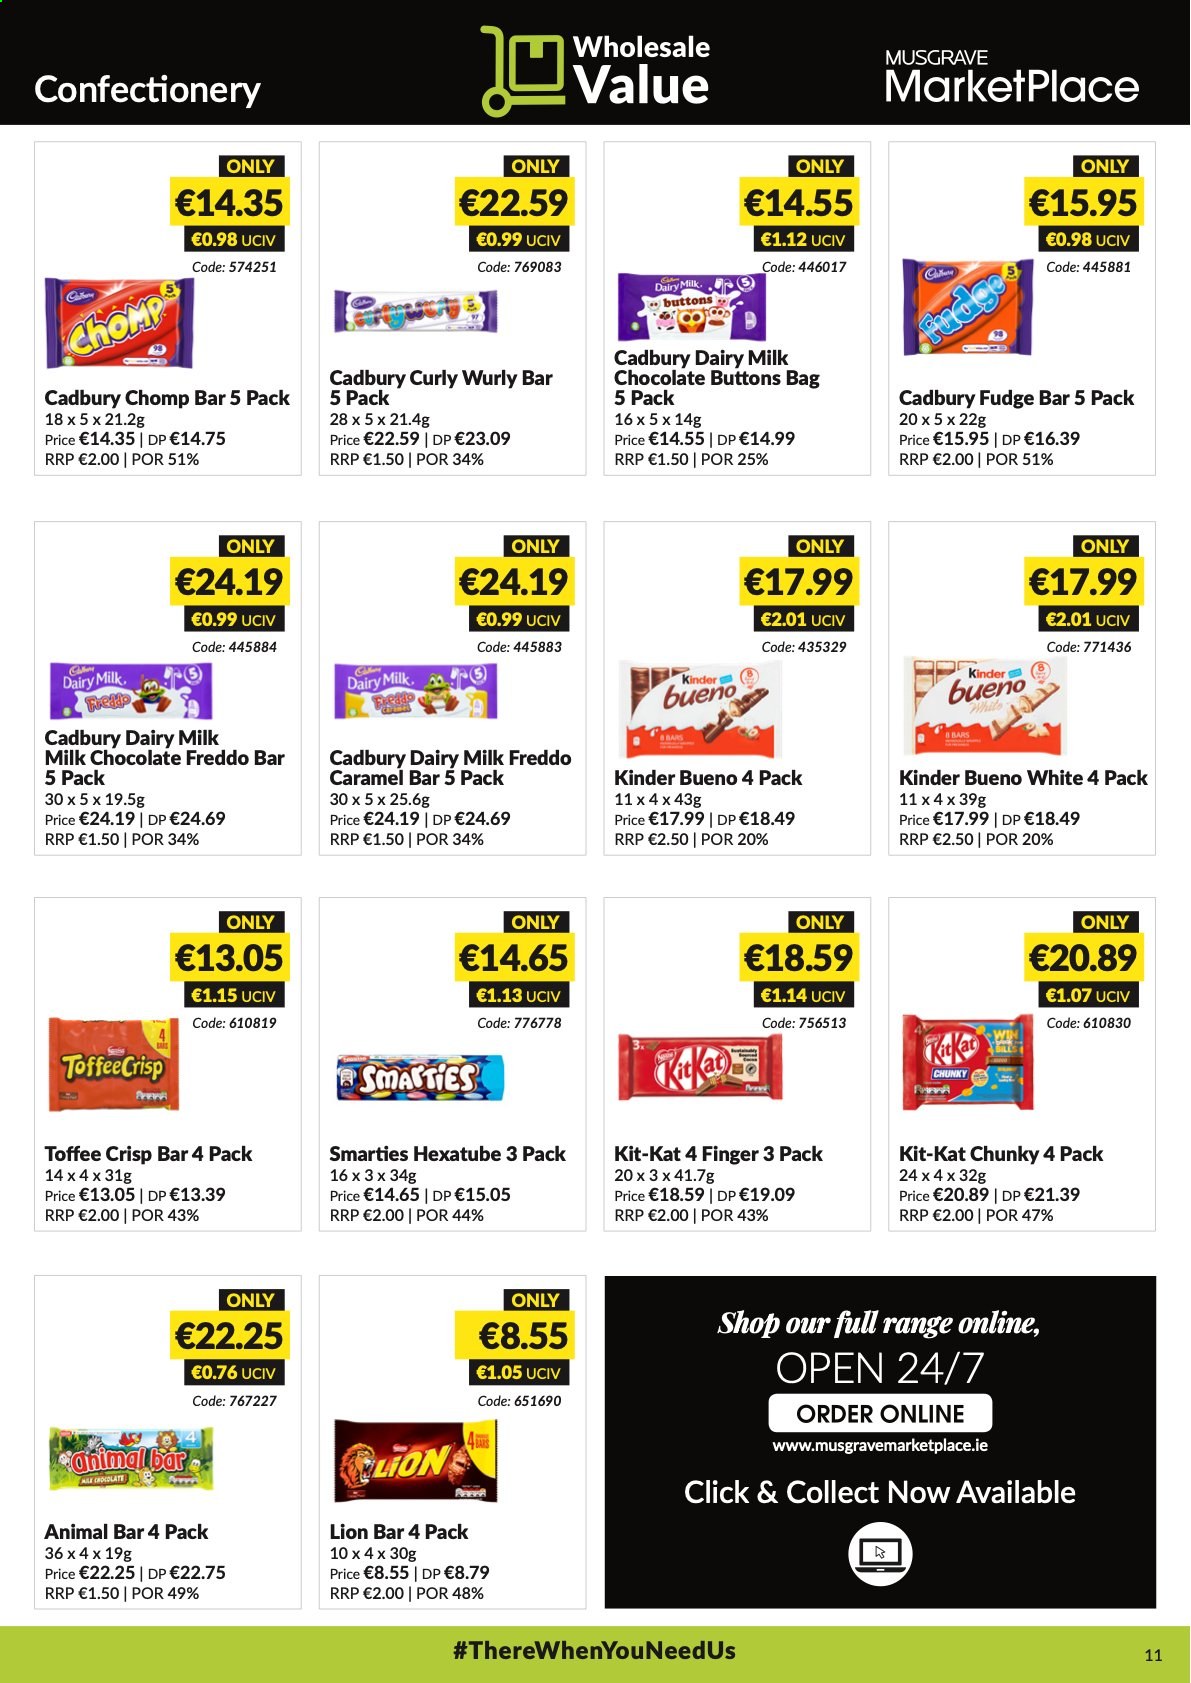 thumbnail - MUSGRAVE Market Place offer  - 09.05.2021 - 05.06.2021 - Sales products - fudge, milk chocolate, chocolate, Smarties, toffee, Kinder Bueno, Cadbury, Dairy Milk, caramel. Page 11.